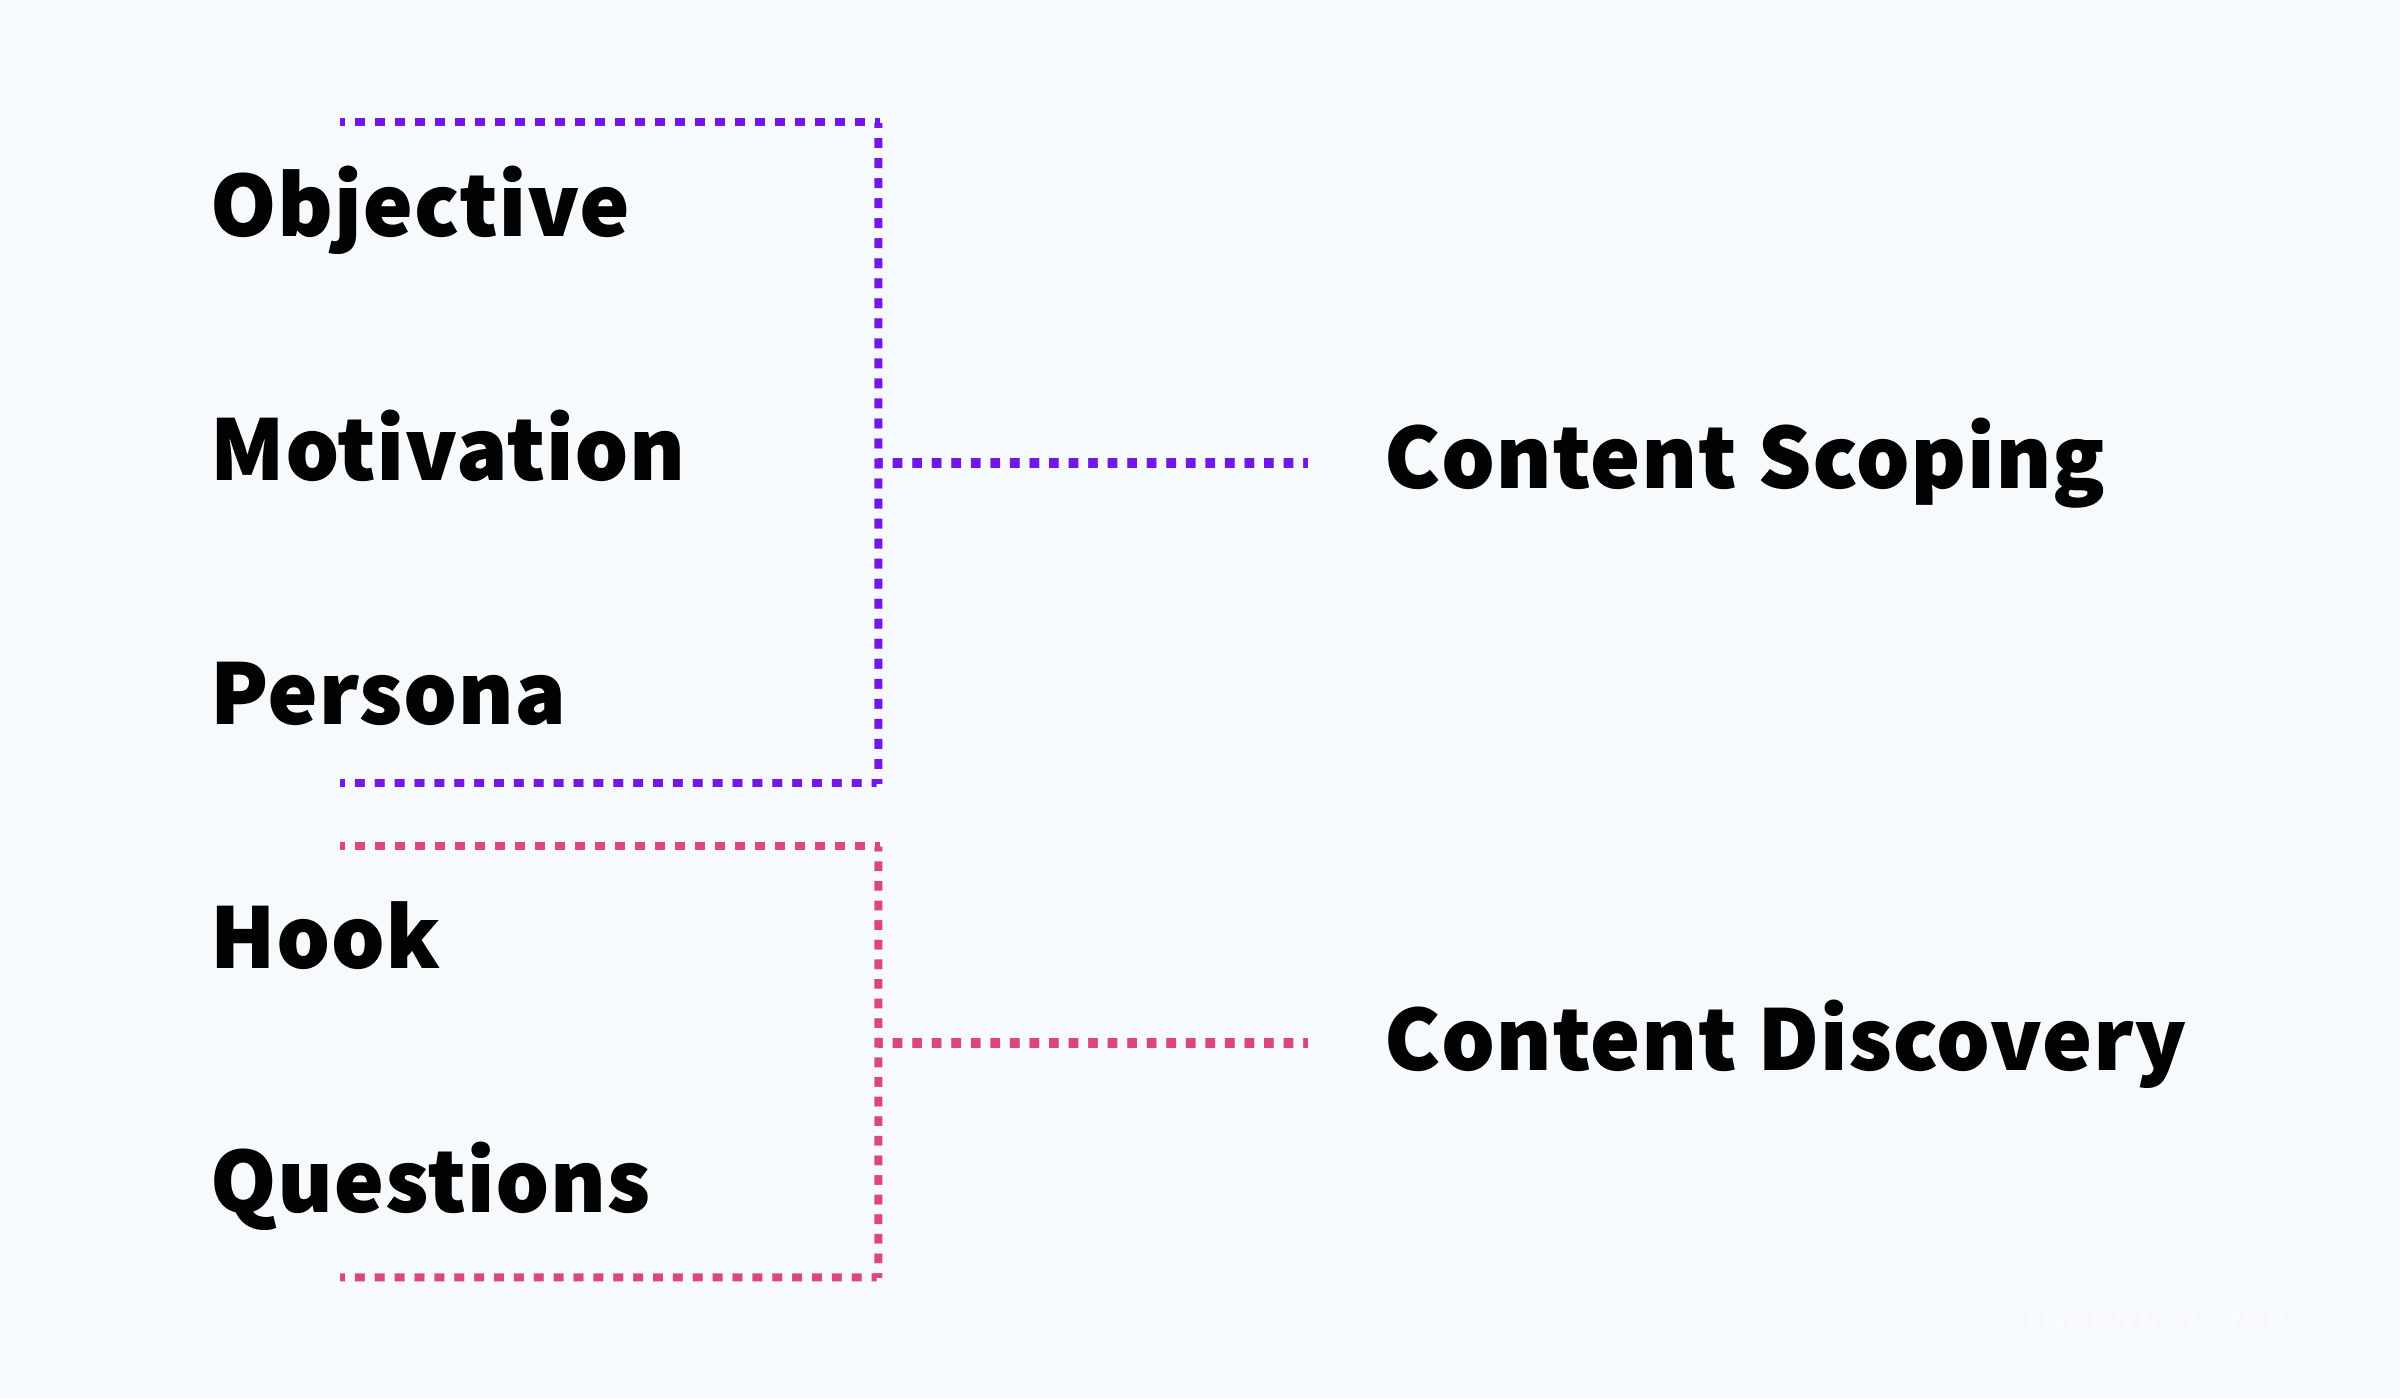 The illustration shows five steps to the left. Three of the steps (Objective, Motivation, and Persona) are grouped under “Content Scoping” and the other two options (Hook and Questions) are grouped under “Content Discovery.”